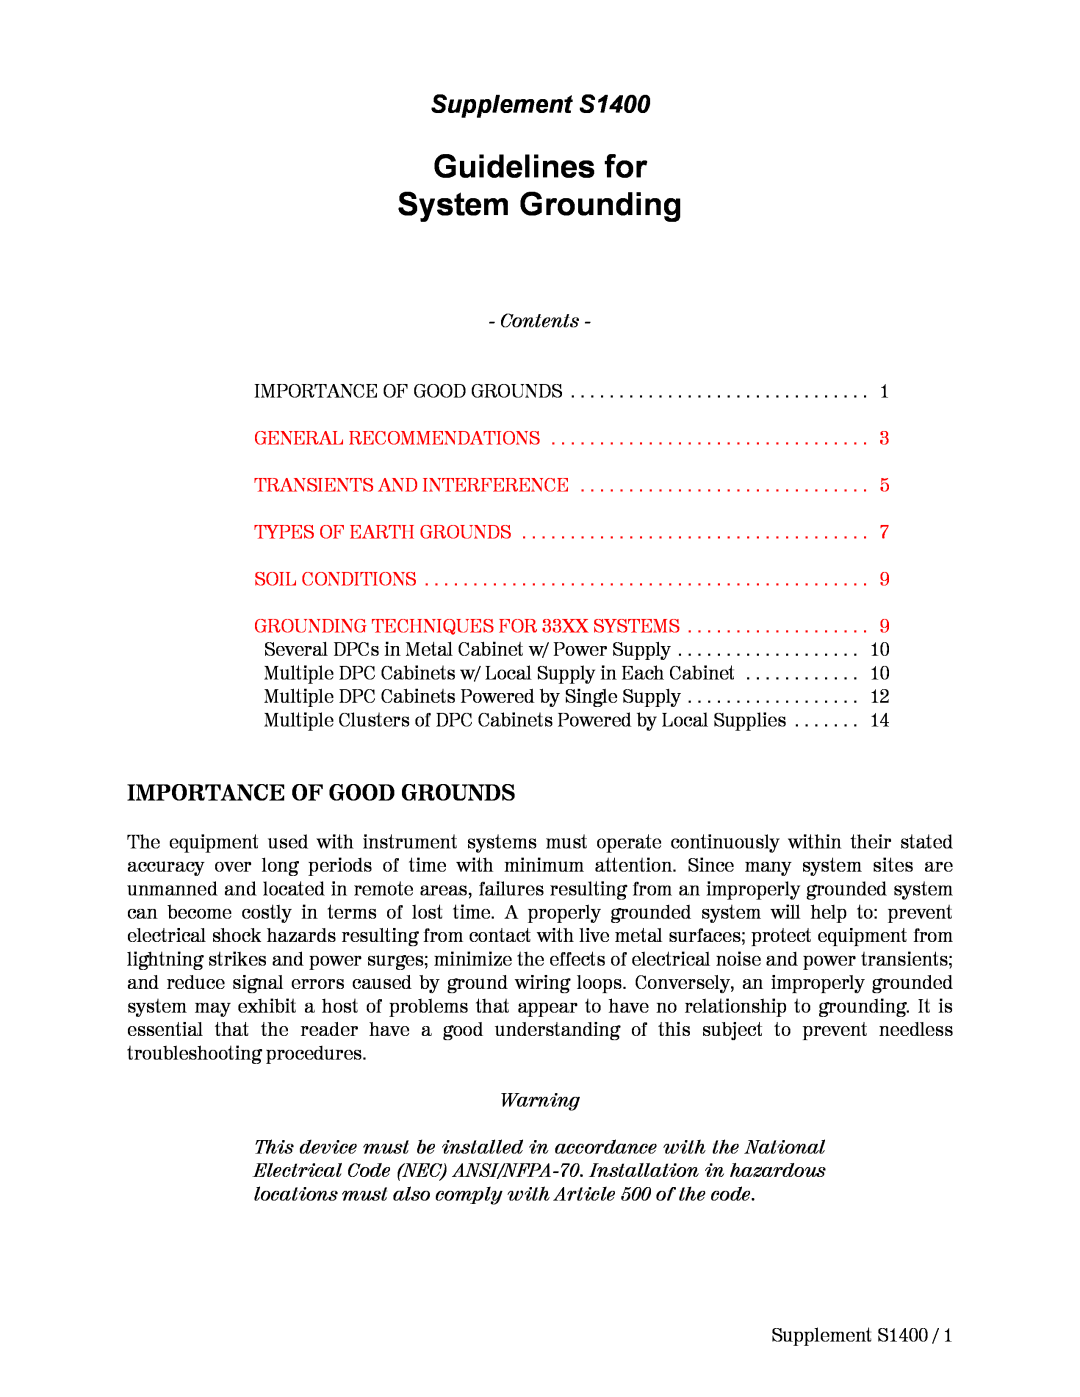 Emerson Process Management 9110-00A, Series 9110 Guidelines for System Grounding, Importance Of Good Grounds, Contents 